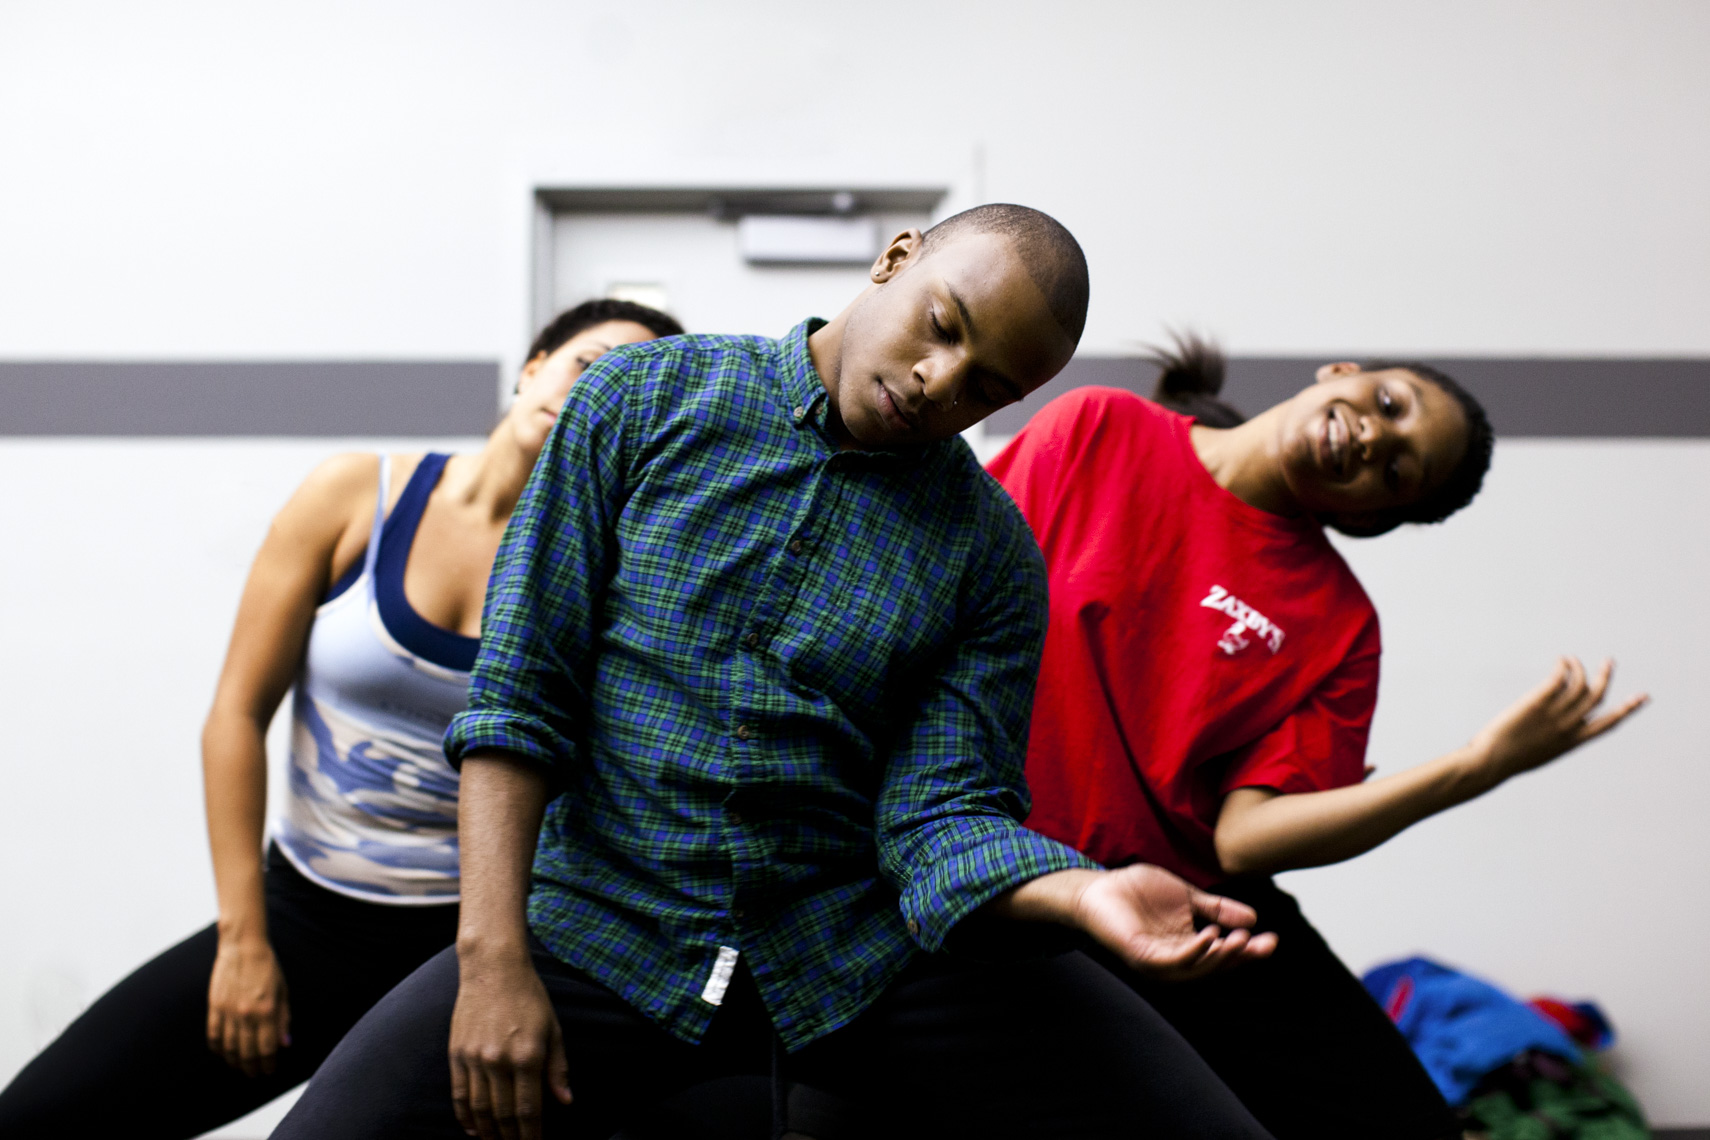 College students rehearse a dance routine during class in a photo by Ryan Donnell